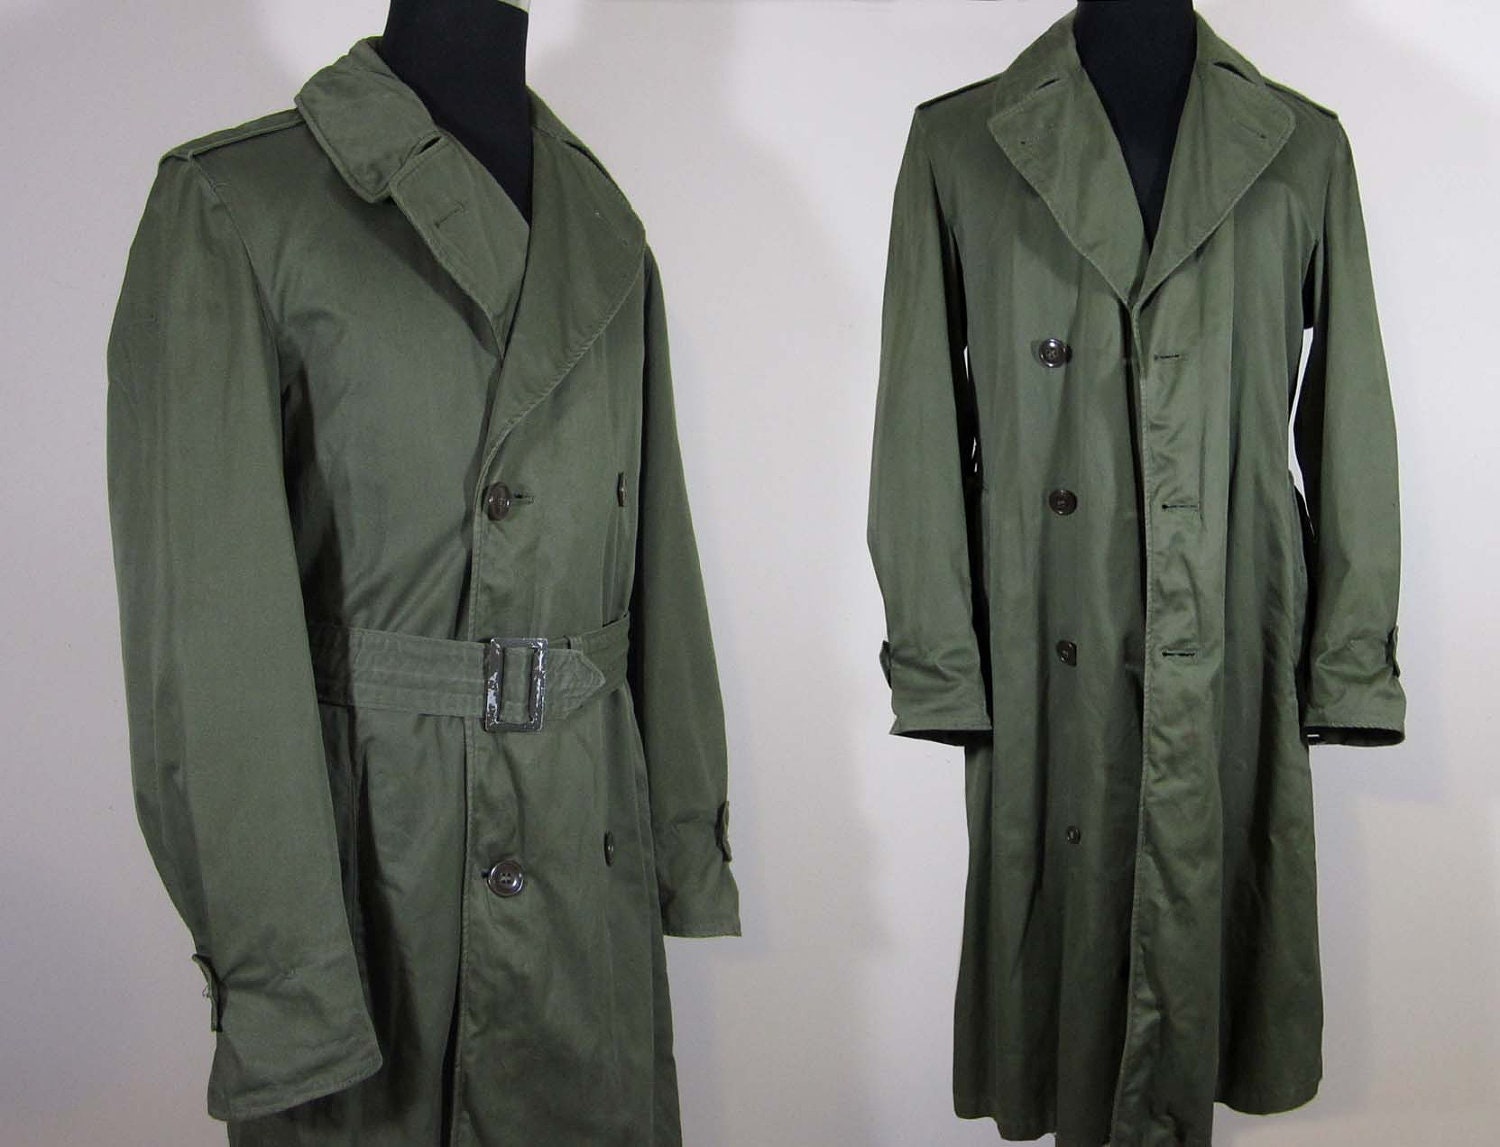 Vintage 50s US Military Overcoat Mens Trench Coat by JanesVintage